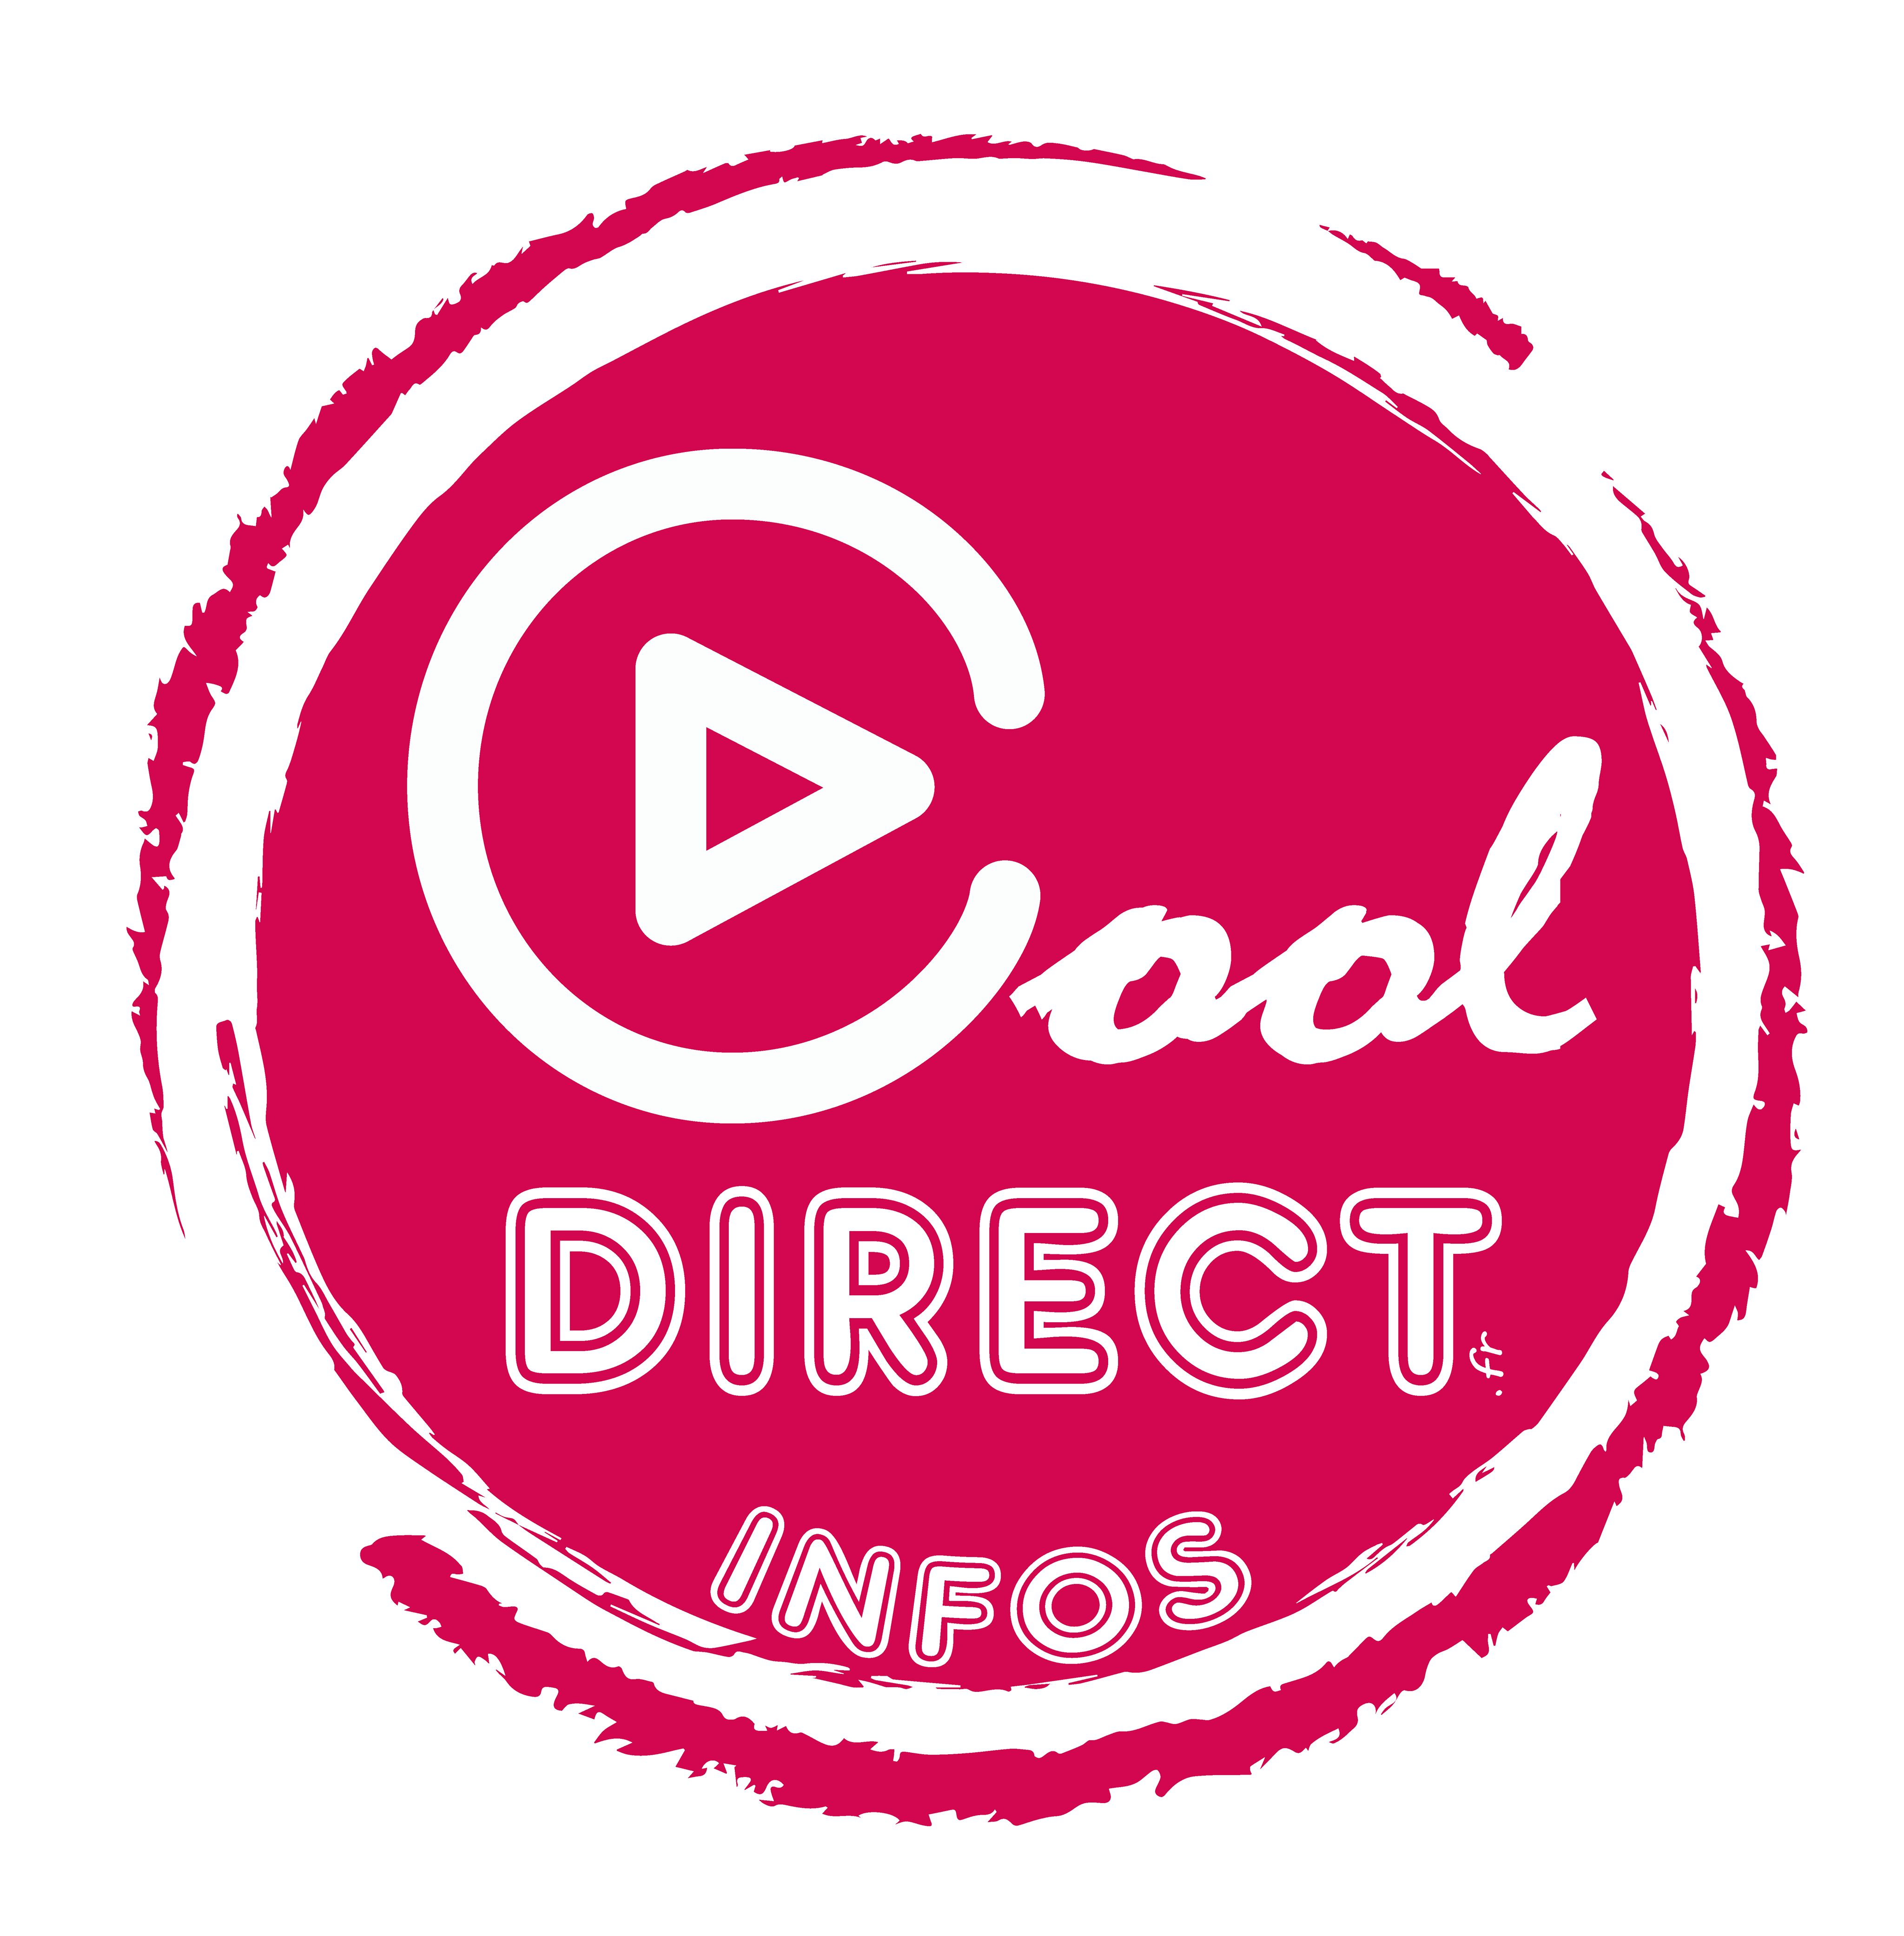 COOLDIRECT INFOS